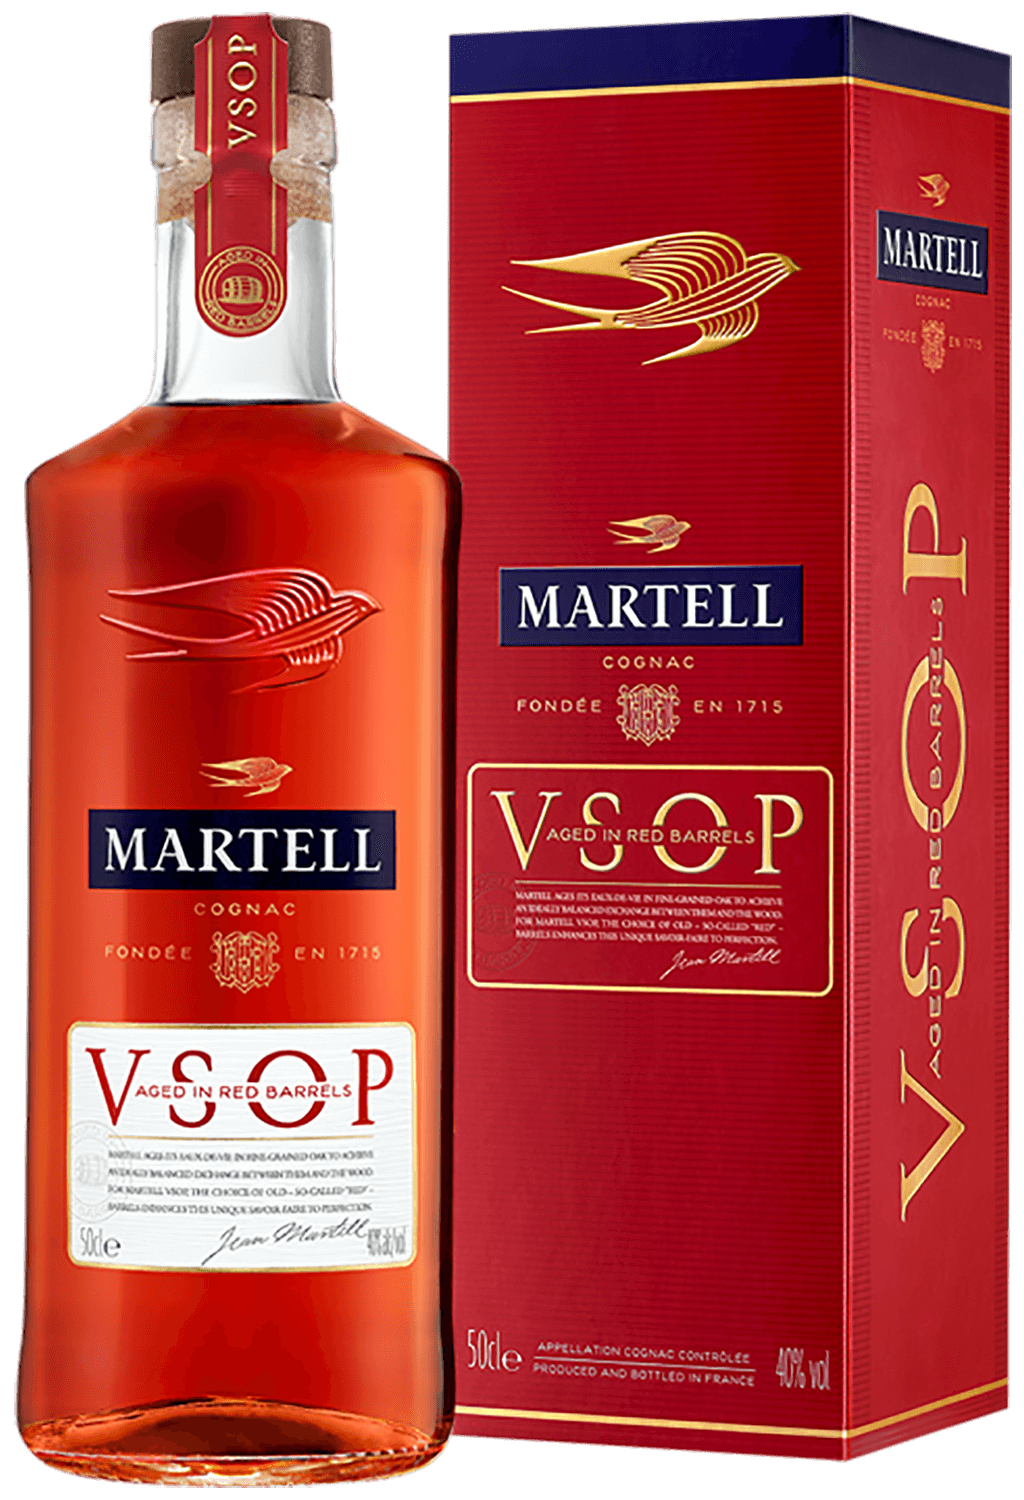 Martell VSOP Aged in Red Barrels (gift box) martell chanteloup perspective xxo gift box